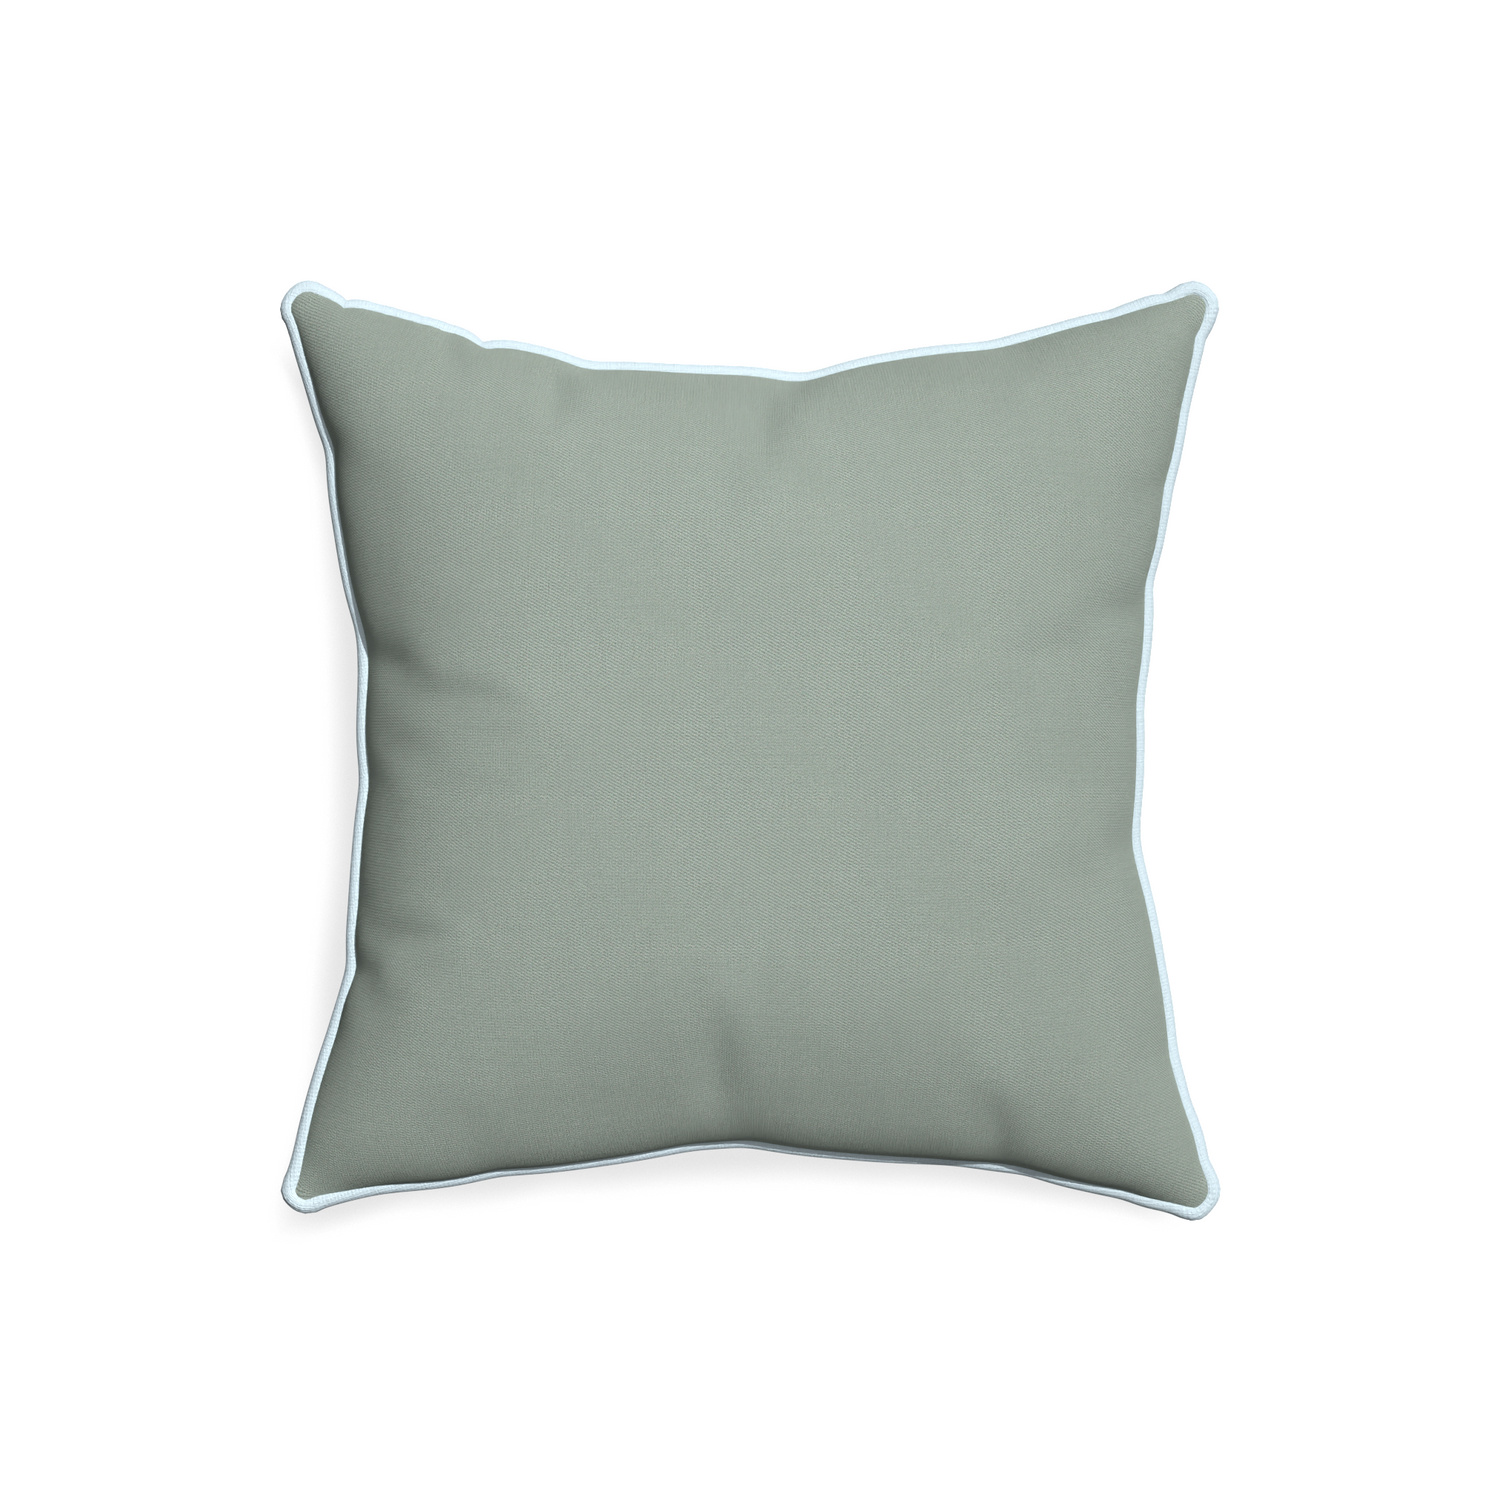 20-square sage custom pillow with powder piping on white background